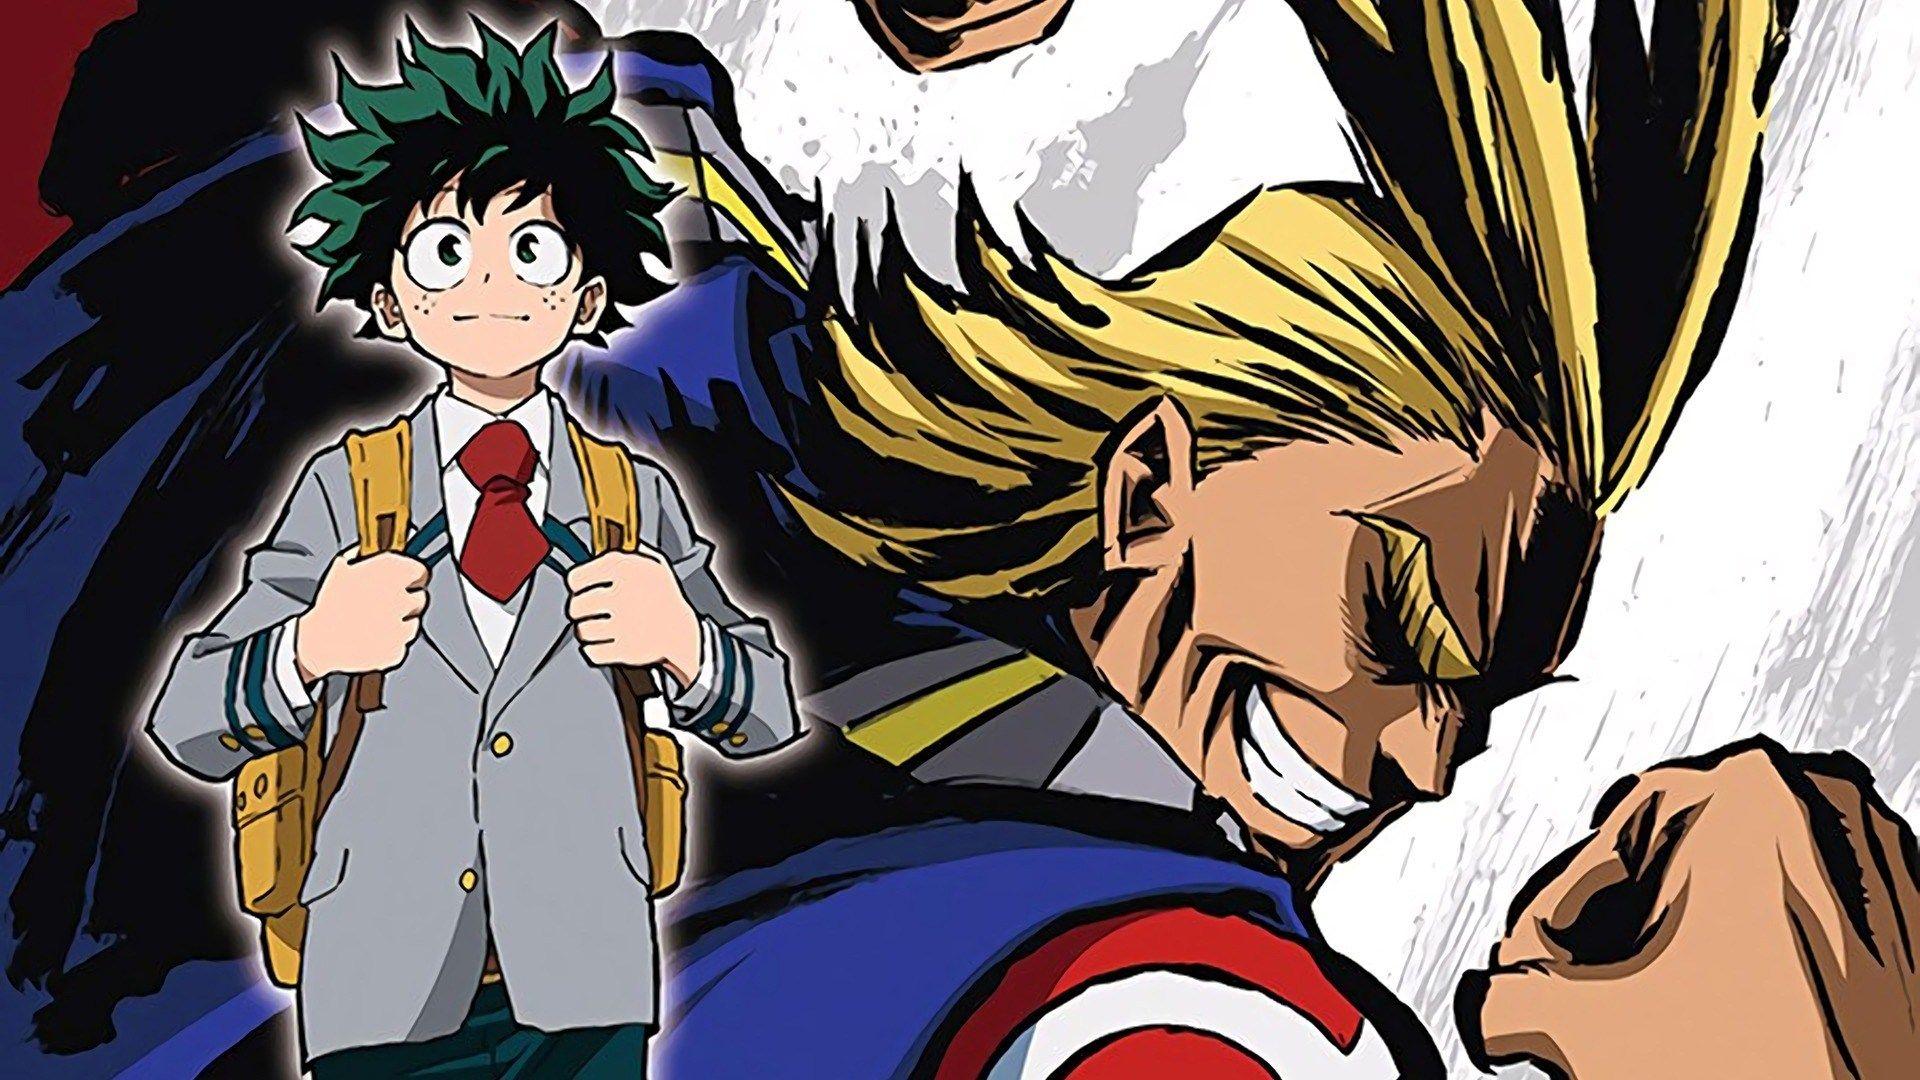 Lessons from My Hero Academia That Encourage Me to Go Beyond!